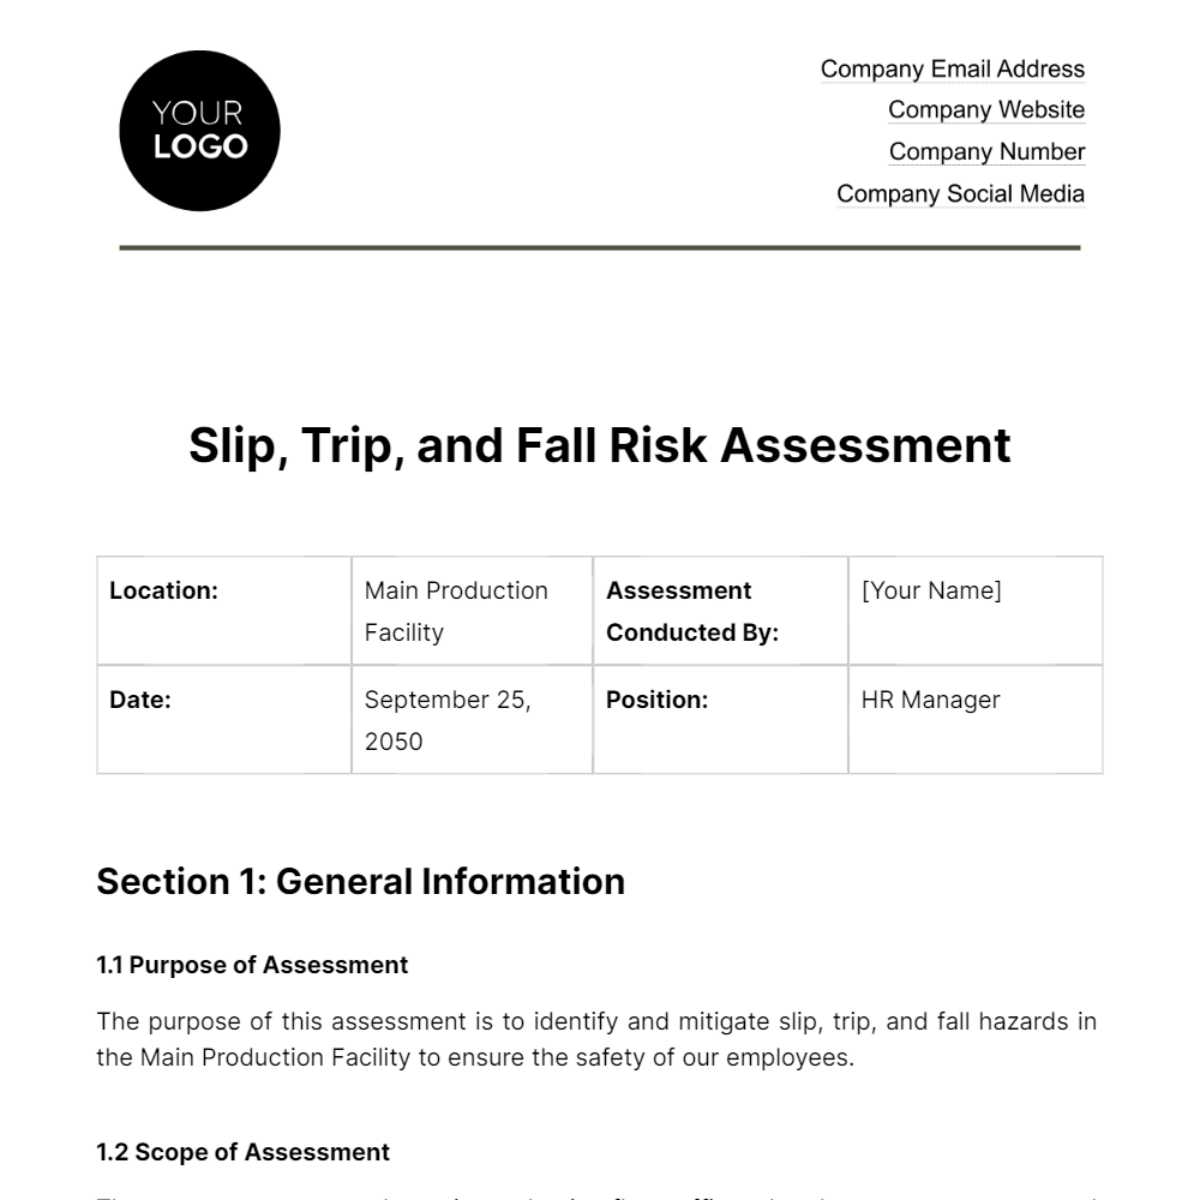 Free Slip, Trip, and Fall Risk Assessment HR Template